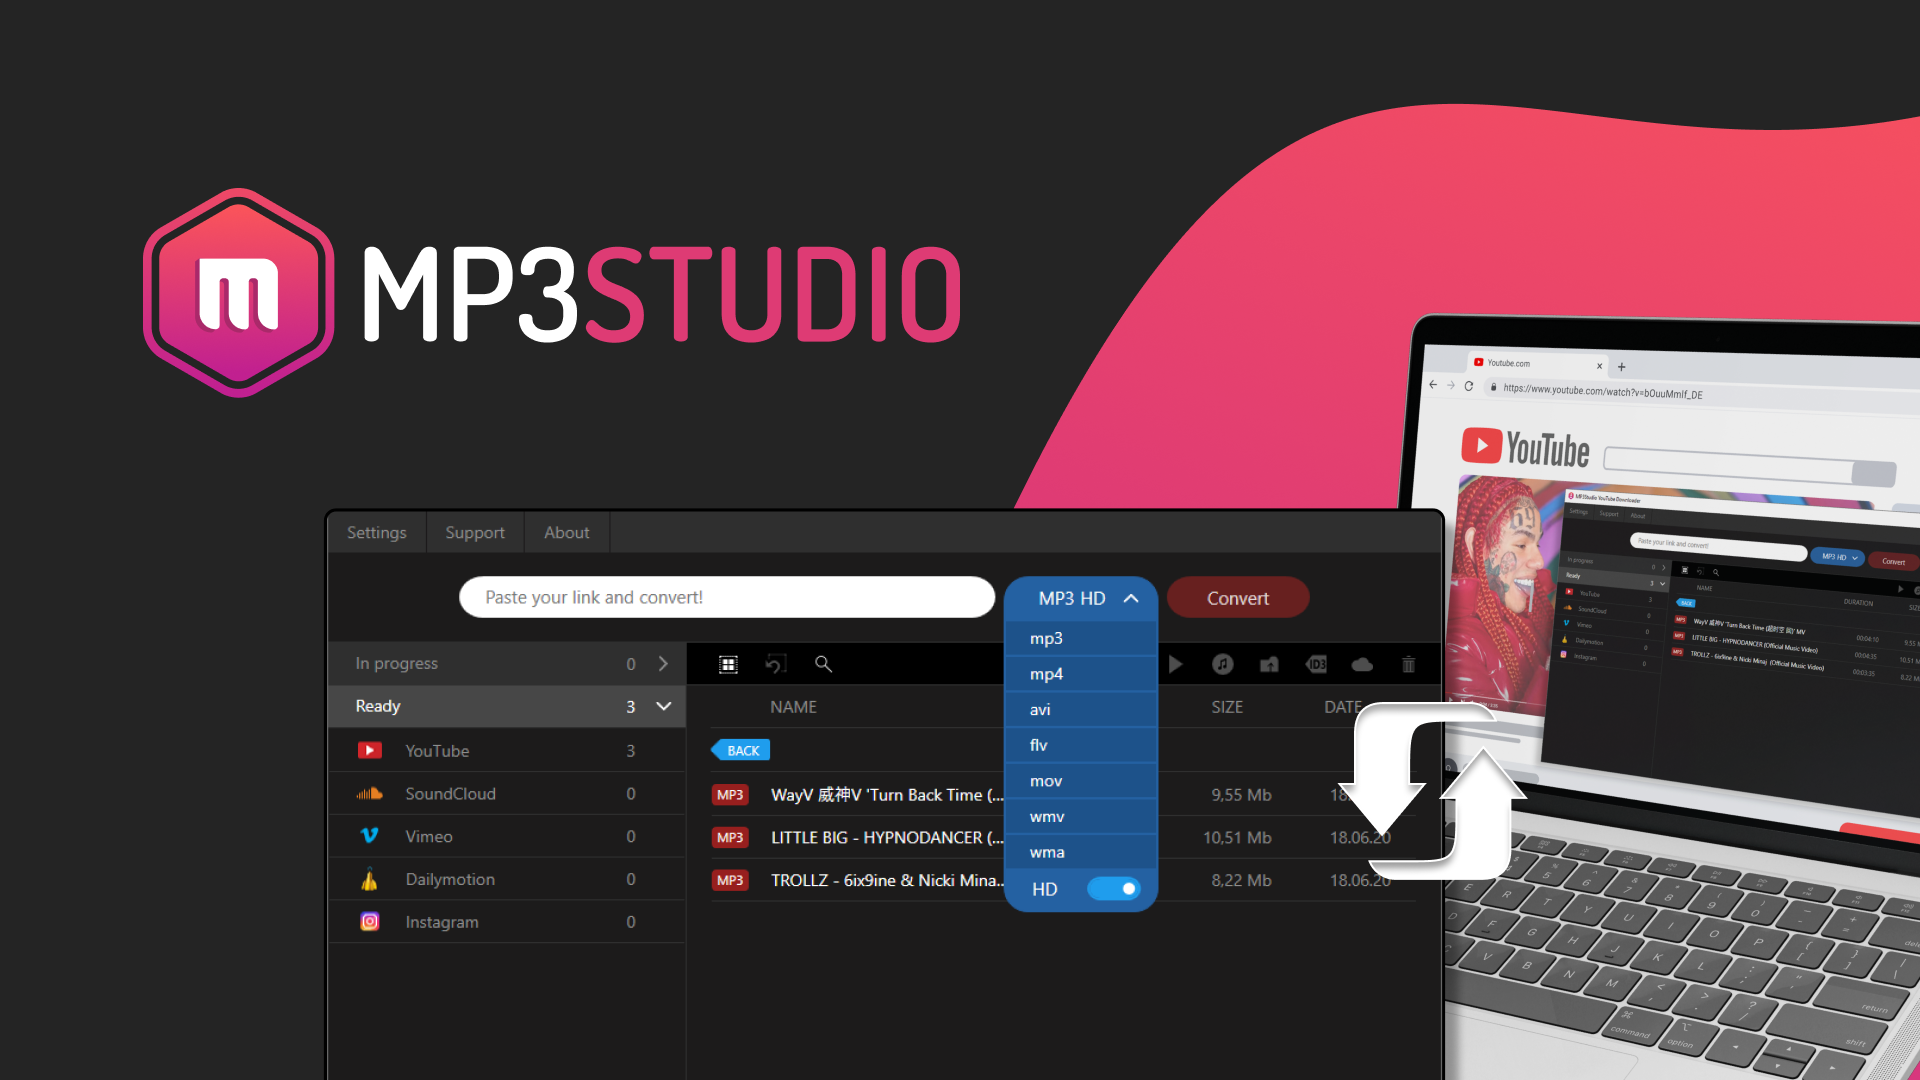 MP3Studio YouTube Downloader 2.0.25.3 instal the new version for windows